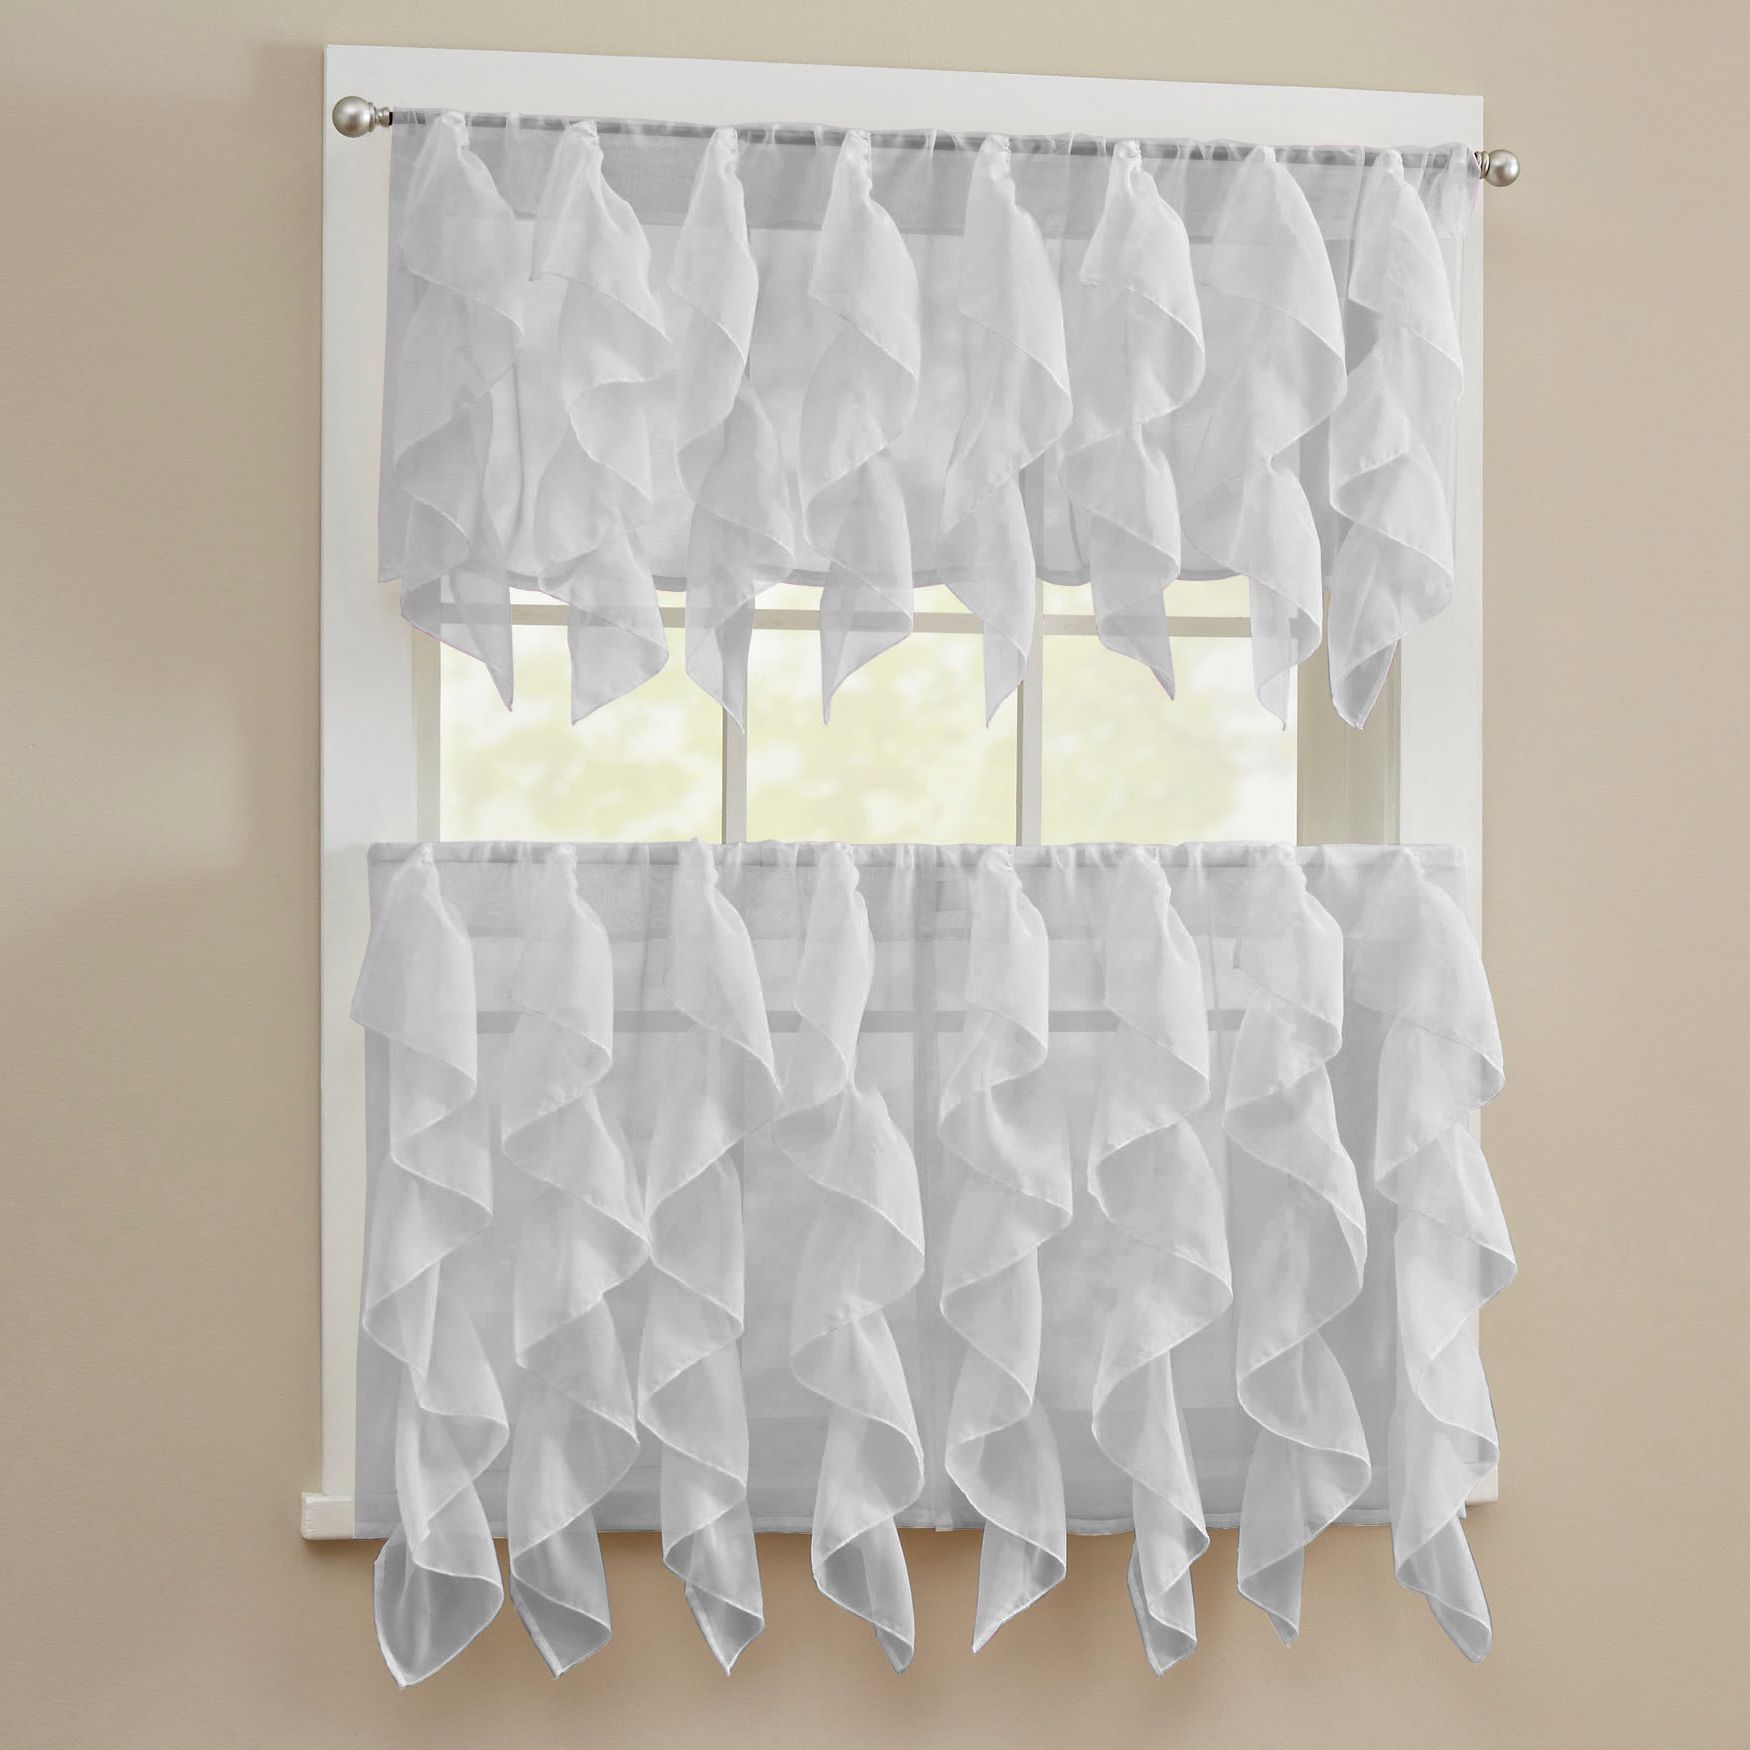 Details About Sheer Voile Vertical Ruffle Window Kitchen Curtain Tiers Or  Valance Silver Intended For Vertical Ruffled Waterfall Valances And Curtain Tiers (Photo 6 of 20)